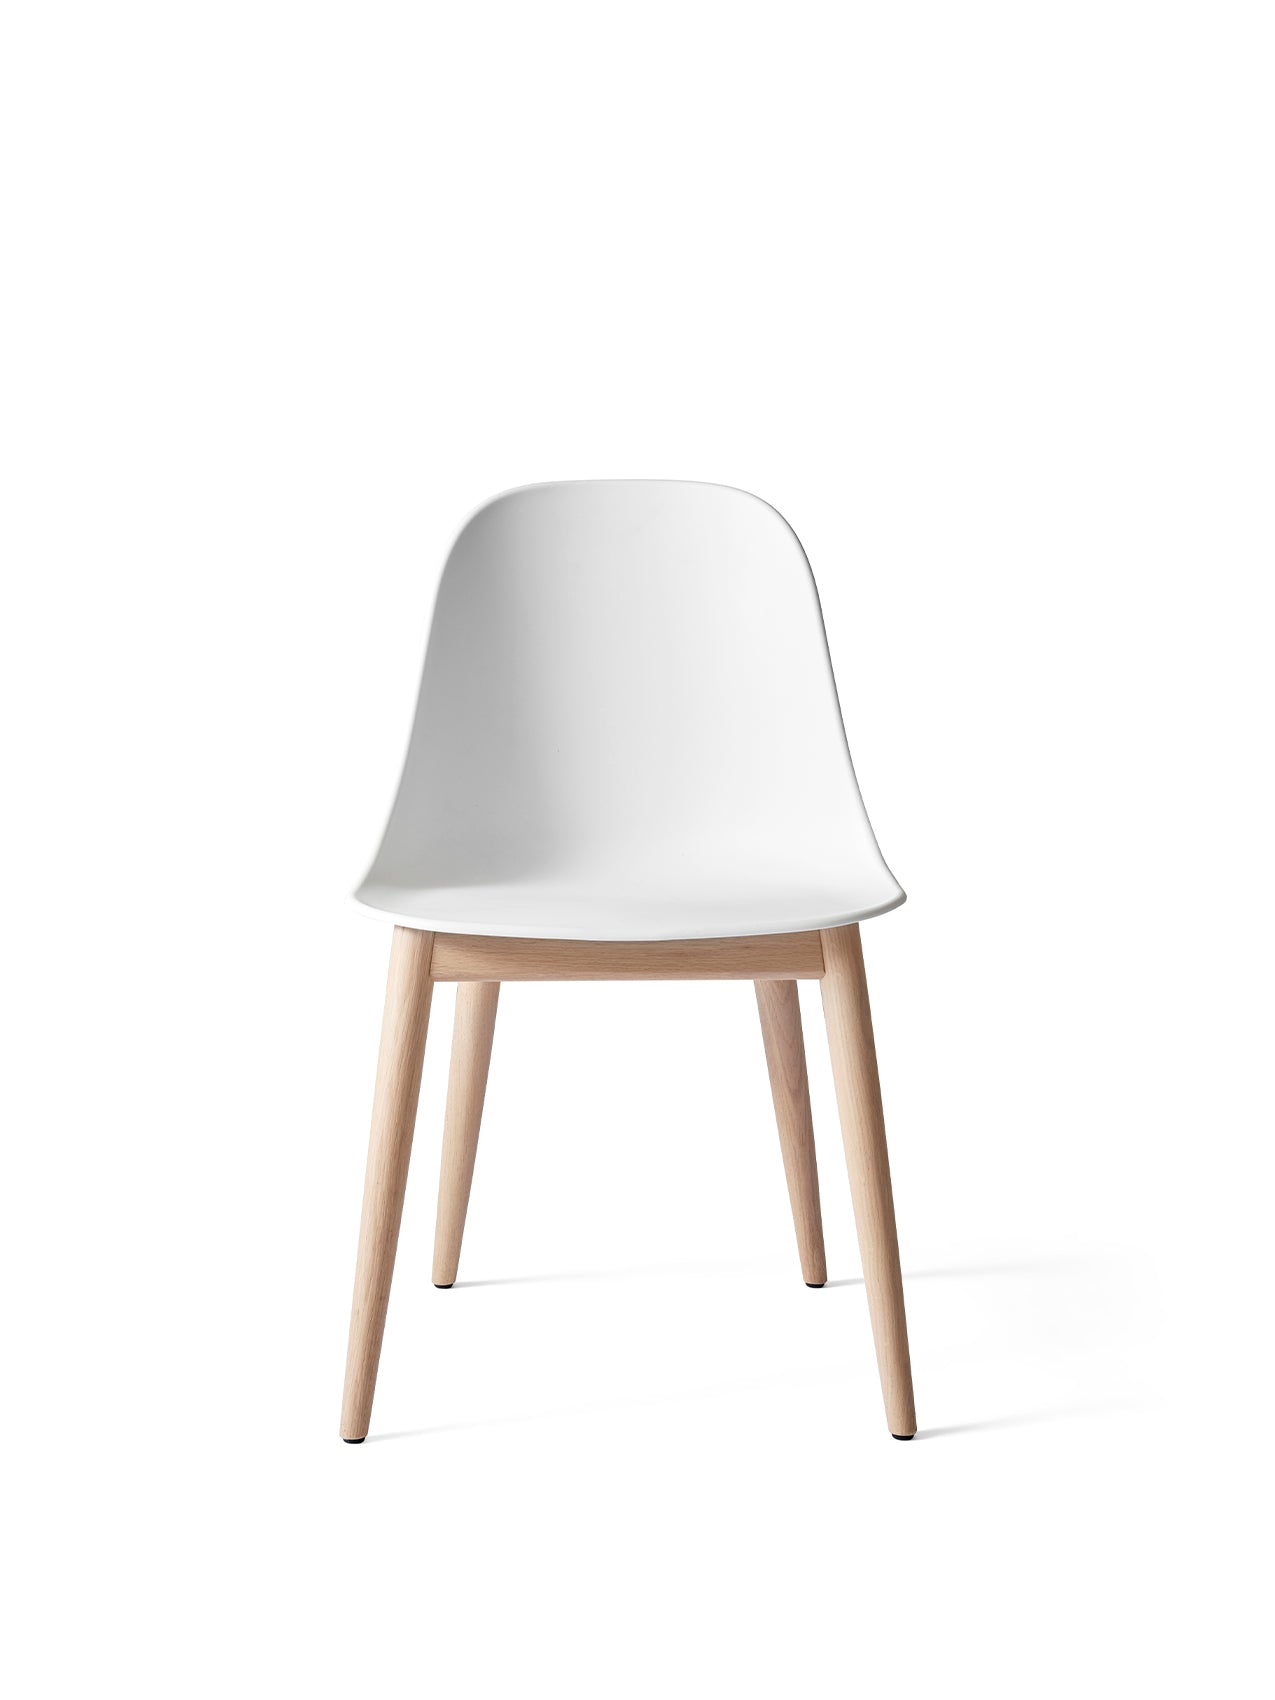 Harbour Side Dining Chair, Wooden Base, Plastic